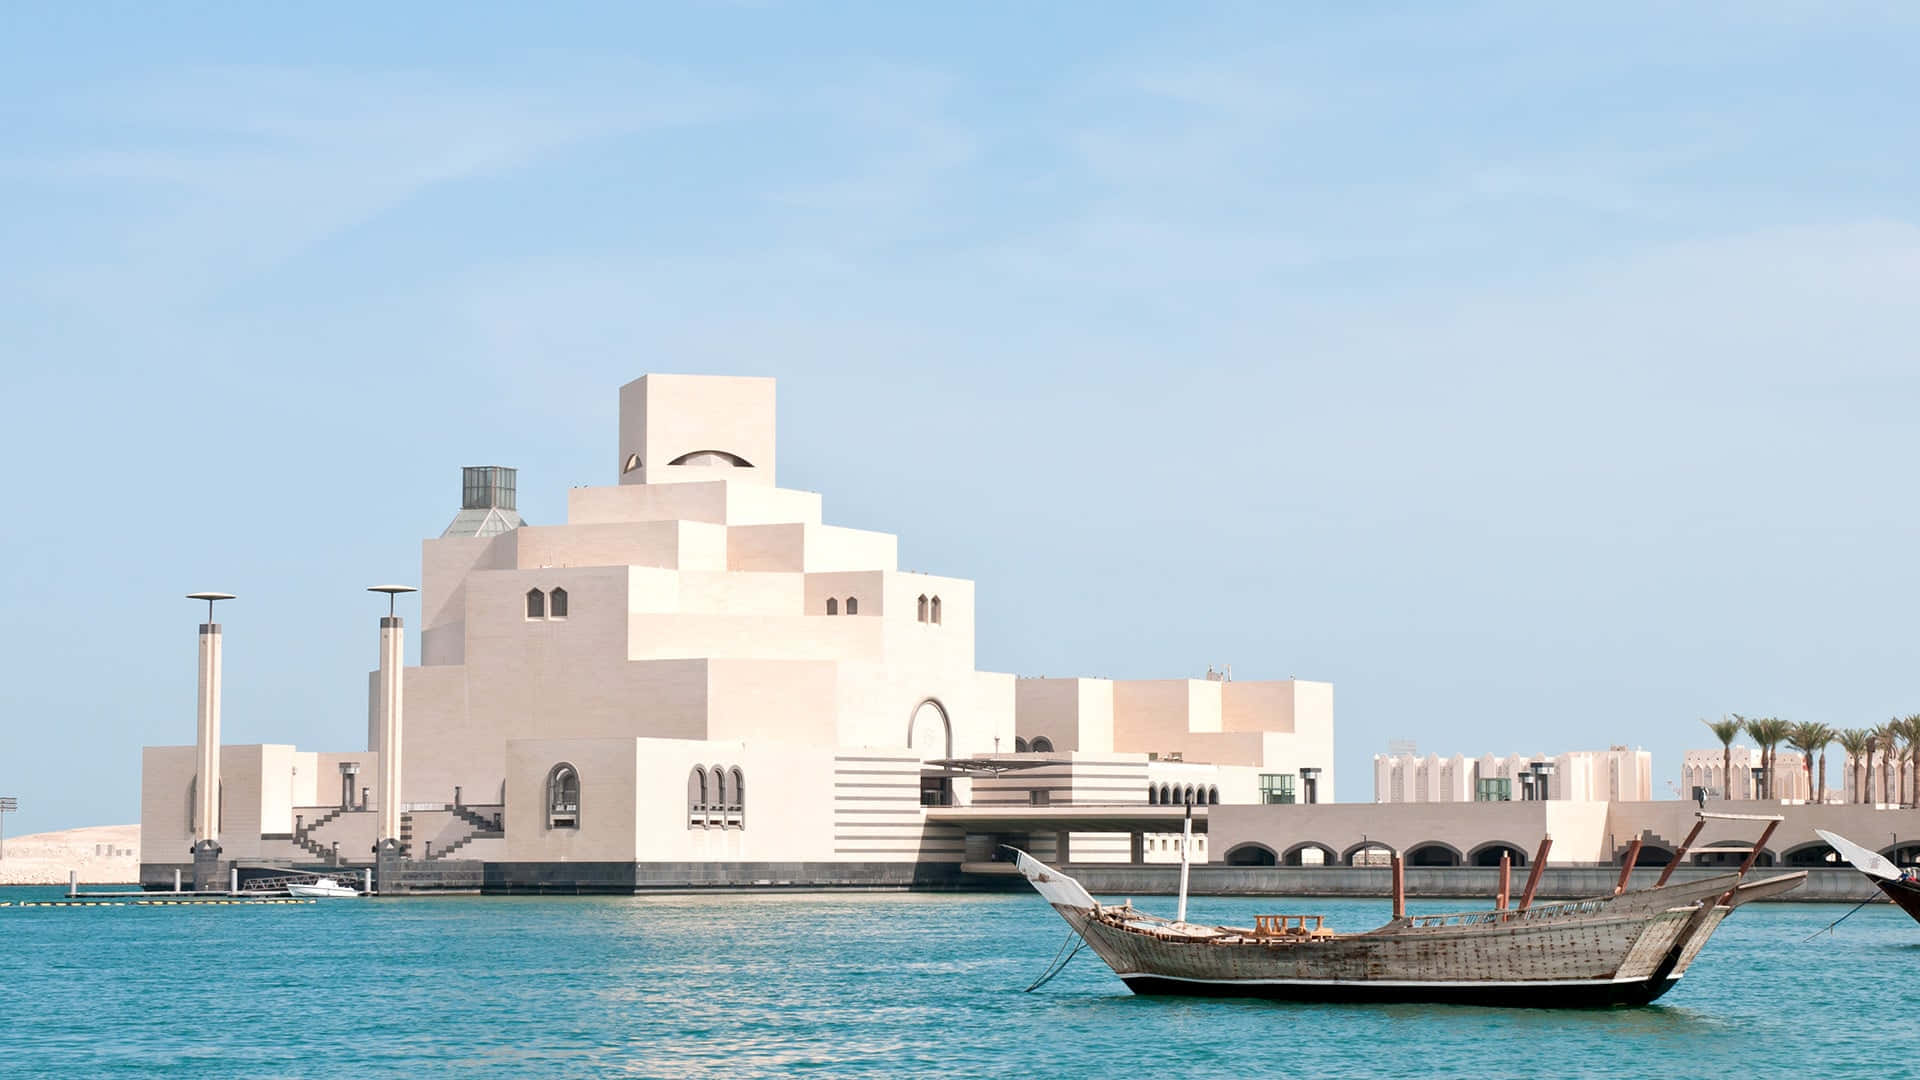 Spectacular view of boats approaching the Museum of Islamic Art Wallpaper